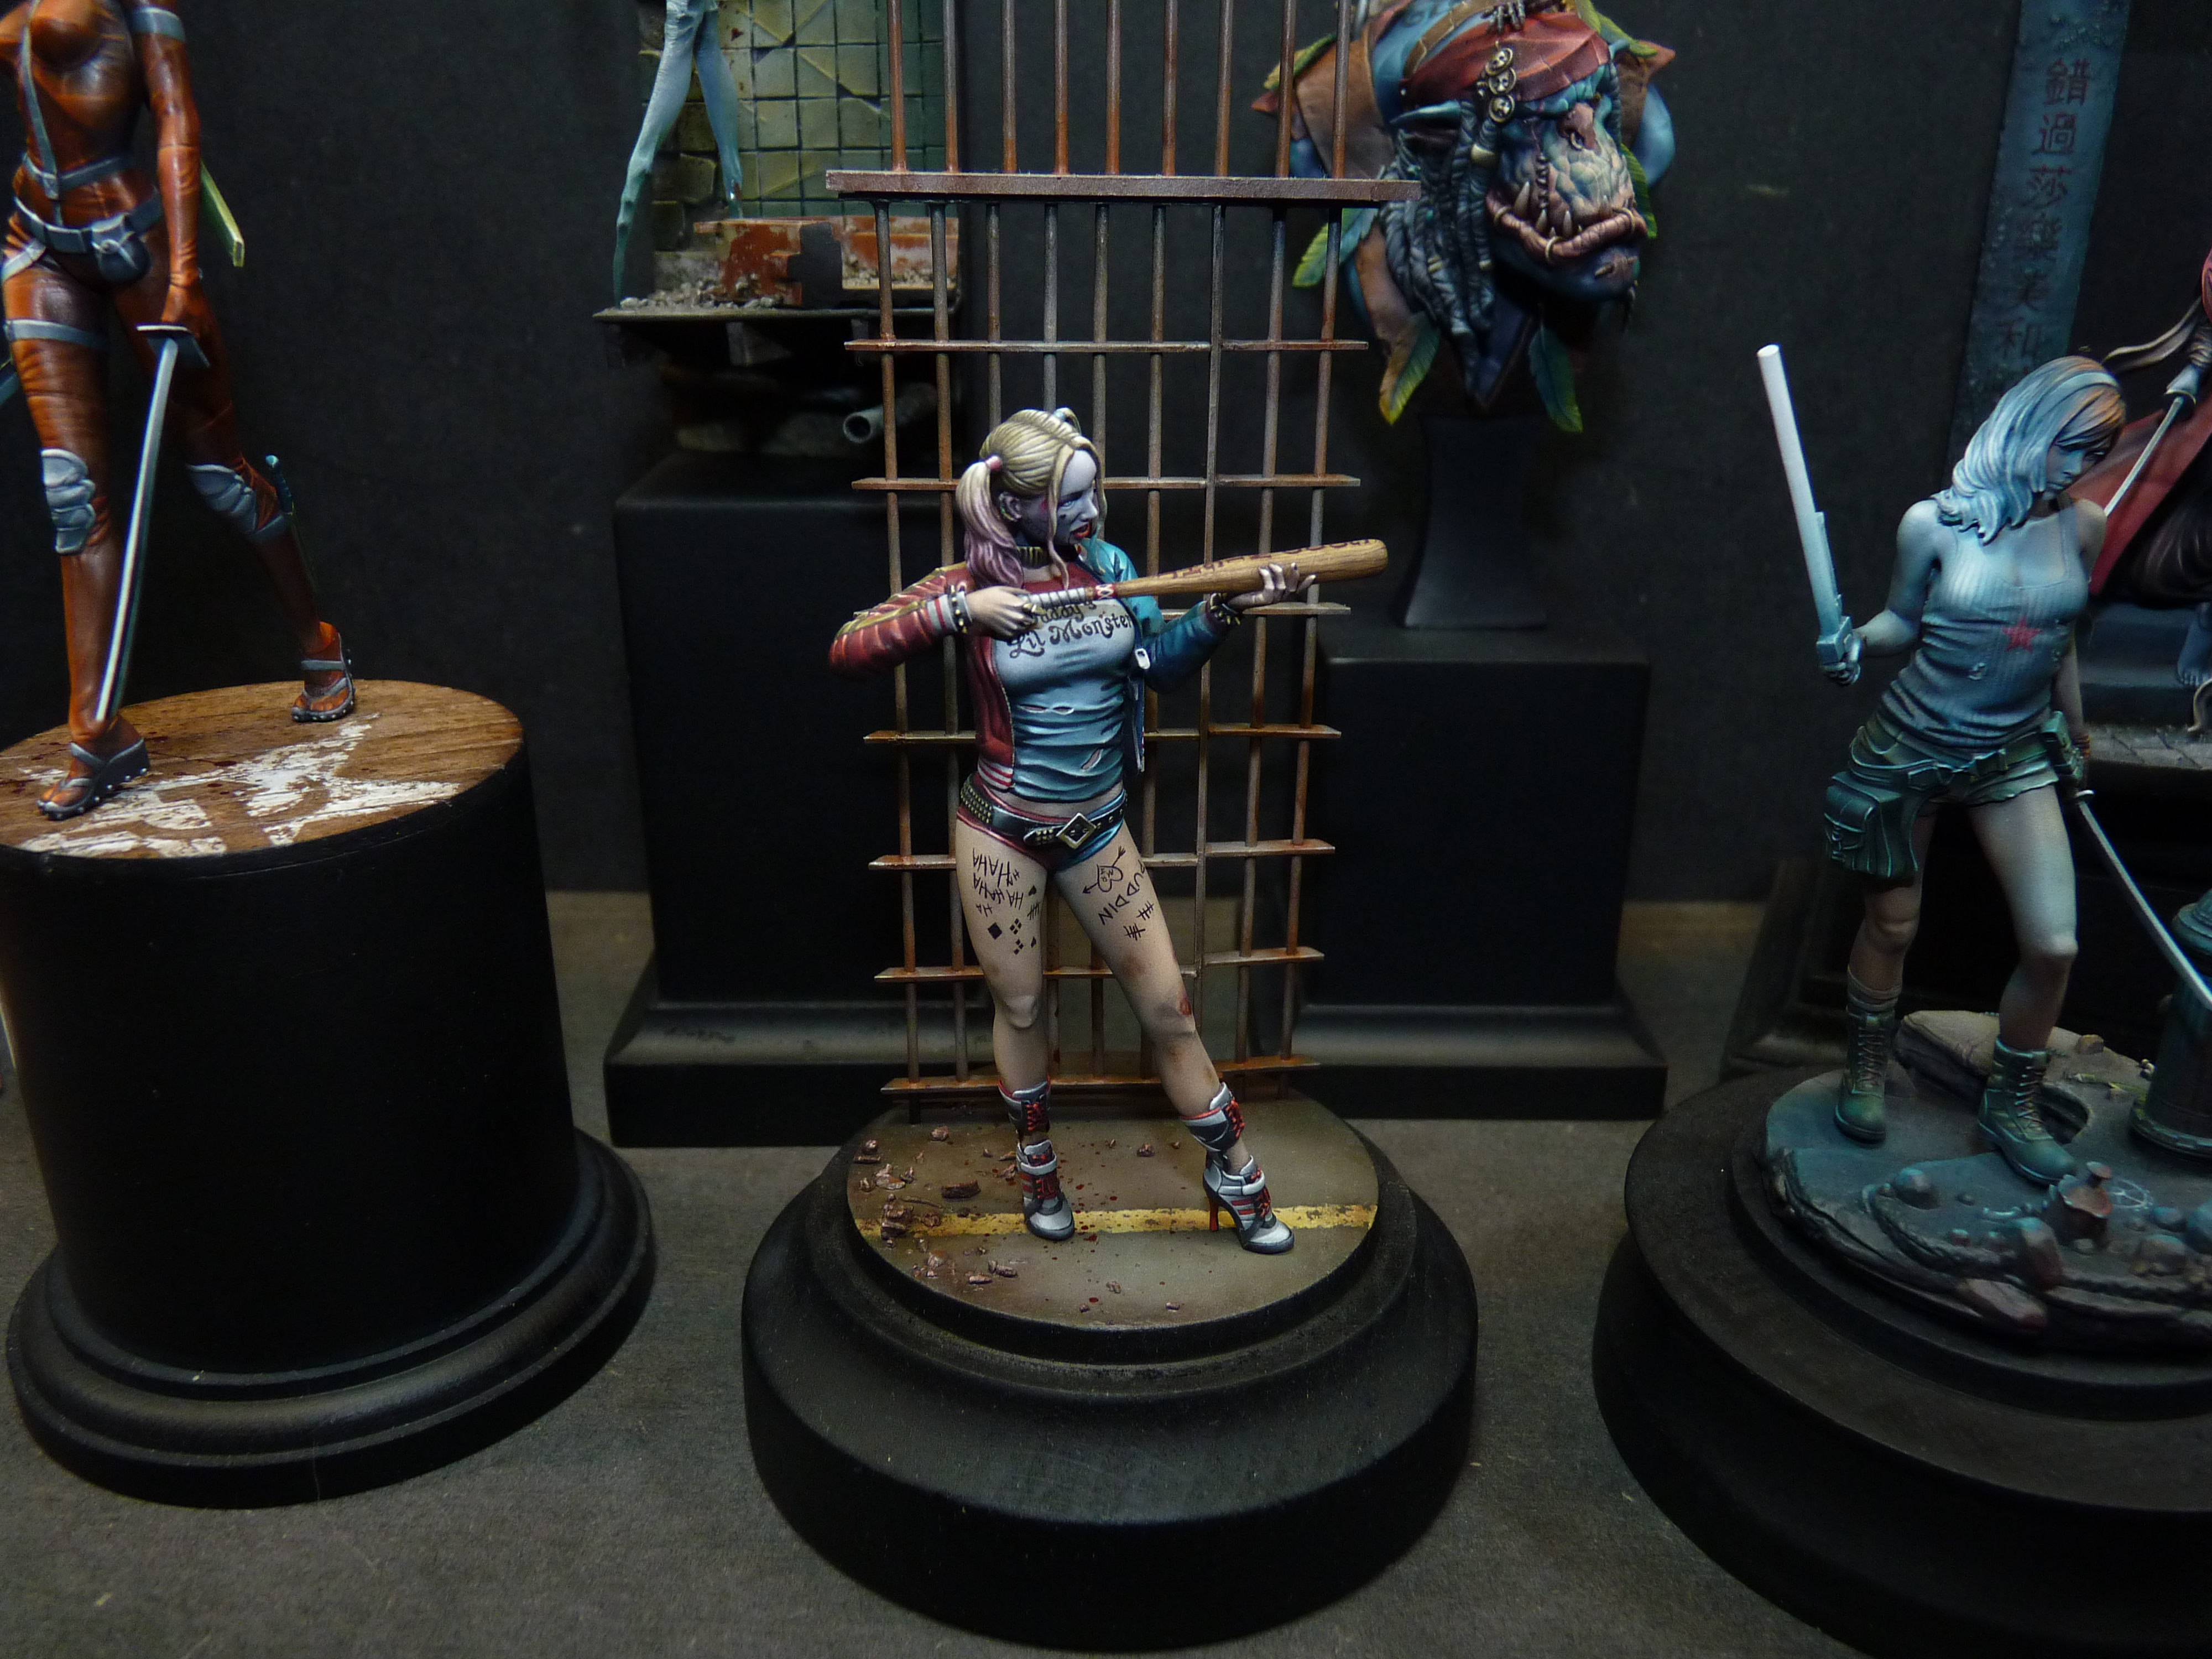 Awesome paintjob by Matthieu Favresse - Silver (for display) in Master Fantasy Figure